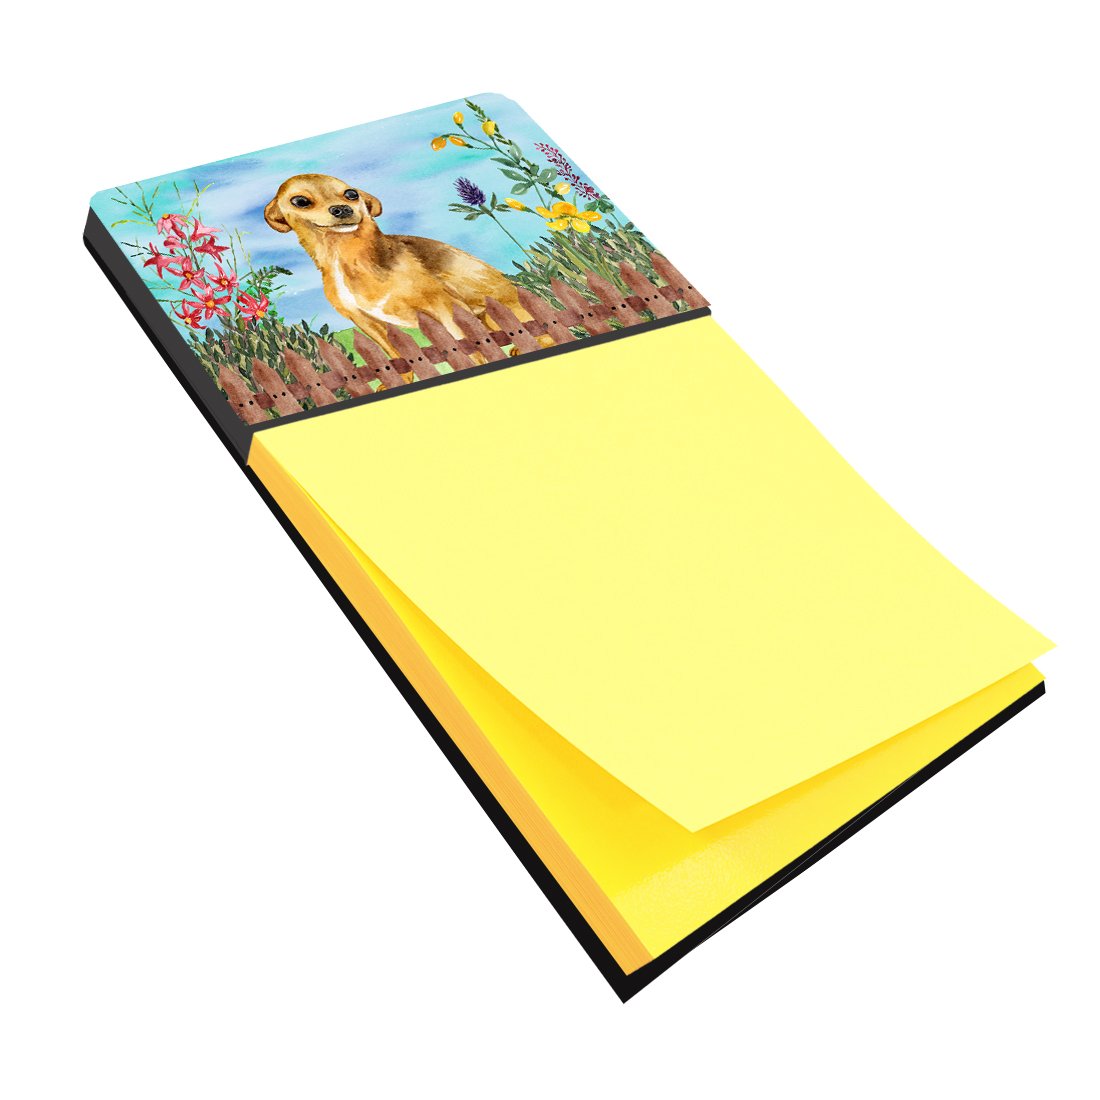 Chihuahua Spring Sticky Note Holder CK1220SN by Caroline's Treasures